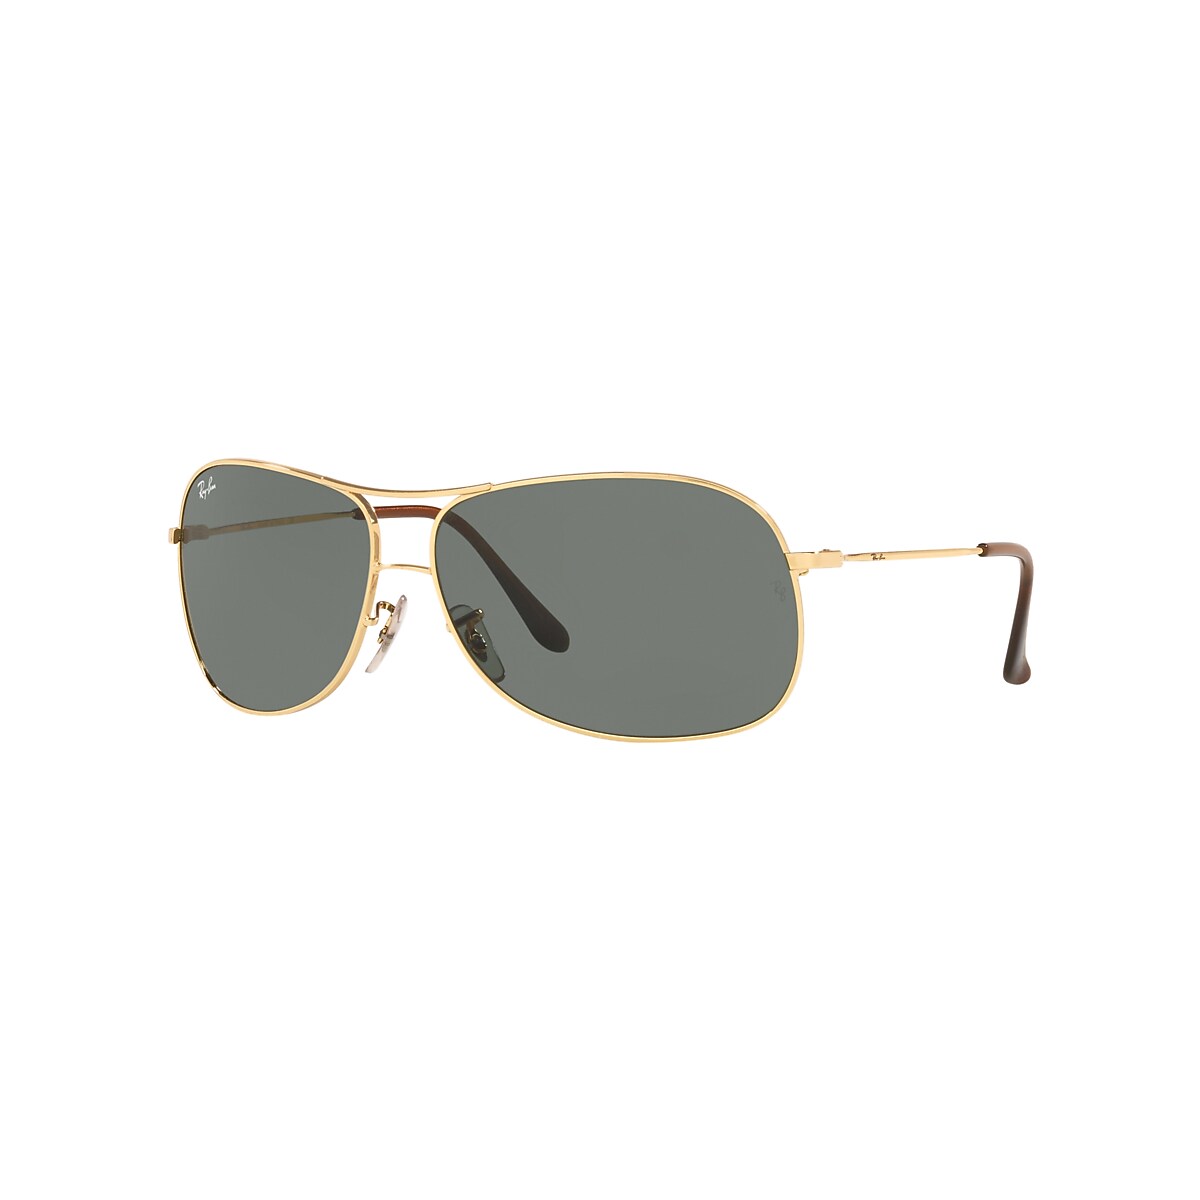 Ray-Ban RB3267 64 Green Classic G-15 & Gold Sunglasses 